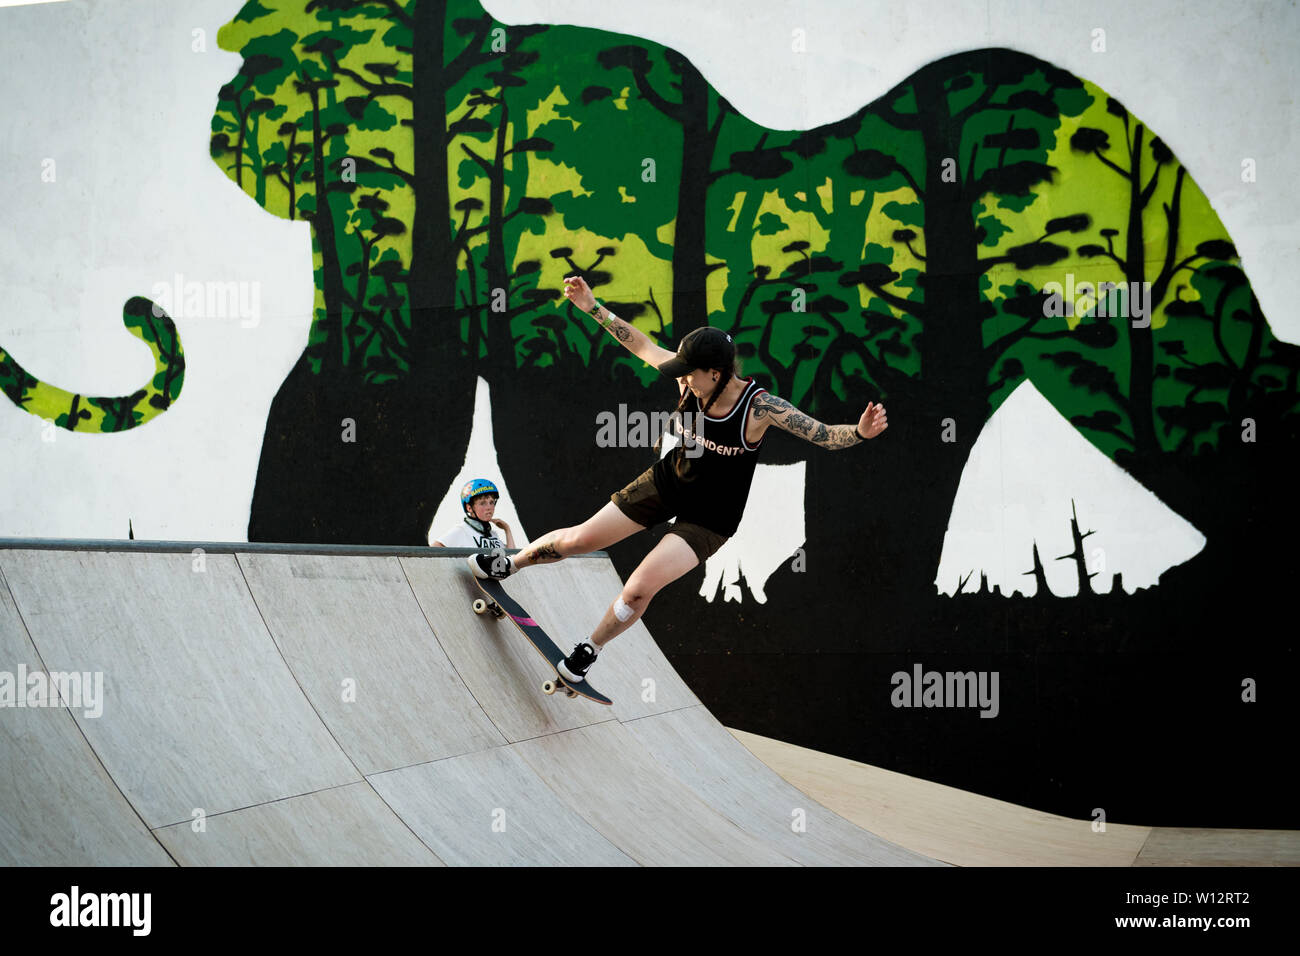 Glastonbury, Pilton, Somerset, UK. 28th June 2019. Female skateboarders  skate and teach others at the ramp in Greenpeace Field of Glastonbury  Festival on Friday 28th June 2019. Credit: Female Perspective/Alamy Live  News